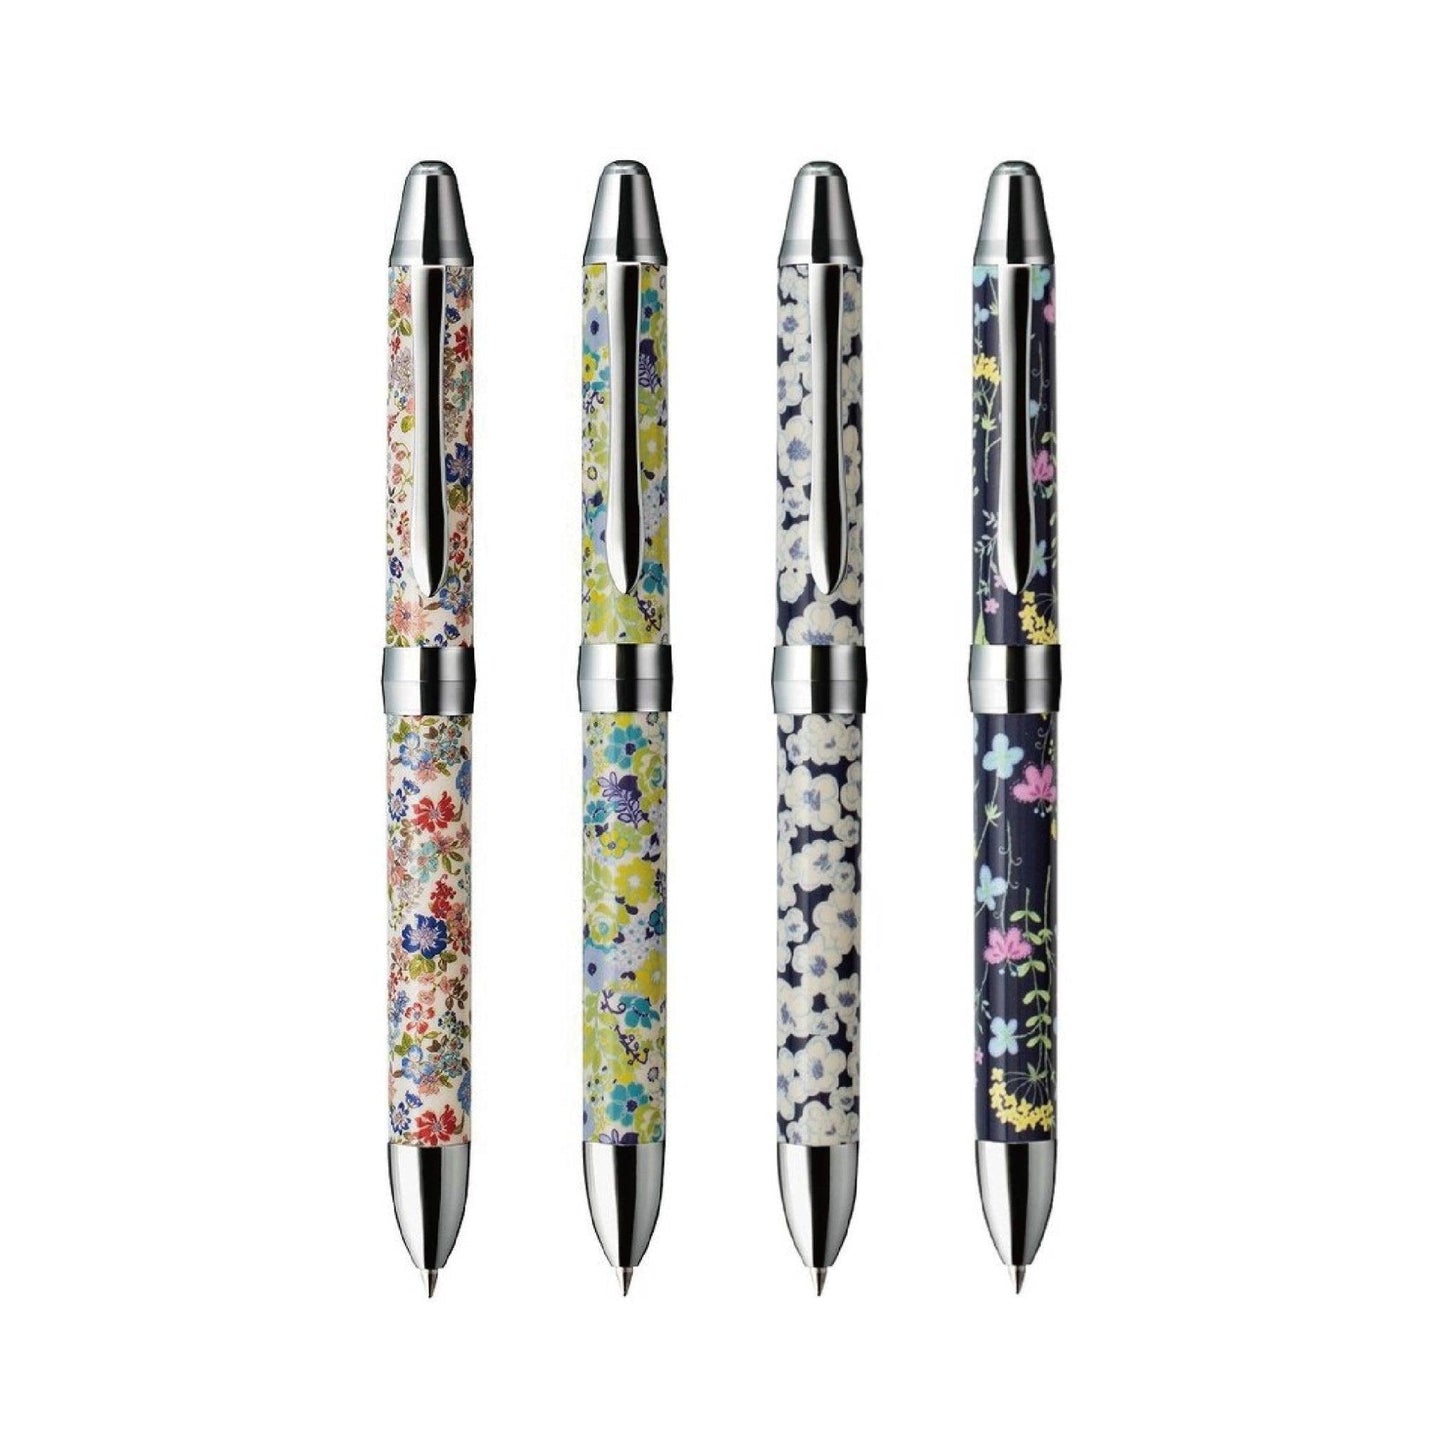 Pentel VICUNA EX Limited Textile Patterns Popular Flowers Retro Patterns Two Plus One Functional Pen Black Ink Red Ink Automatic Pen - CHL-STORE 